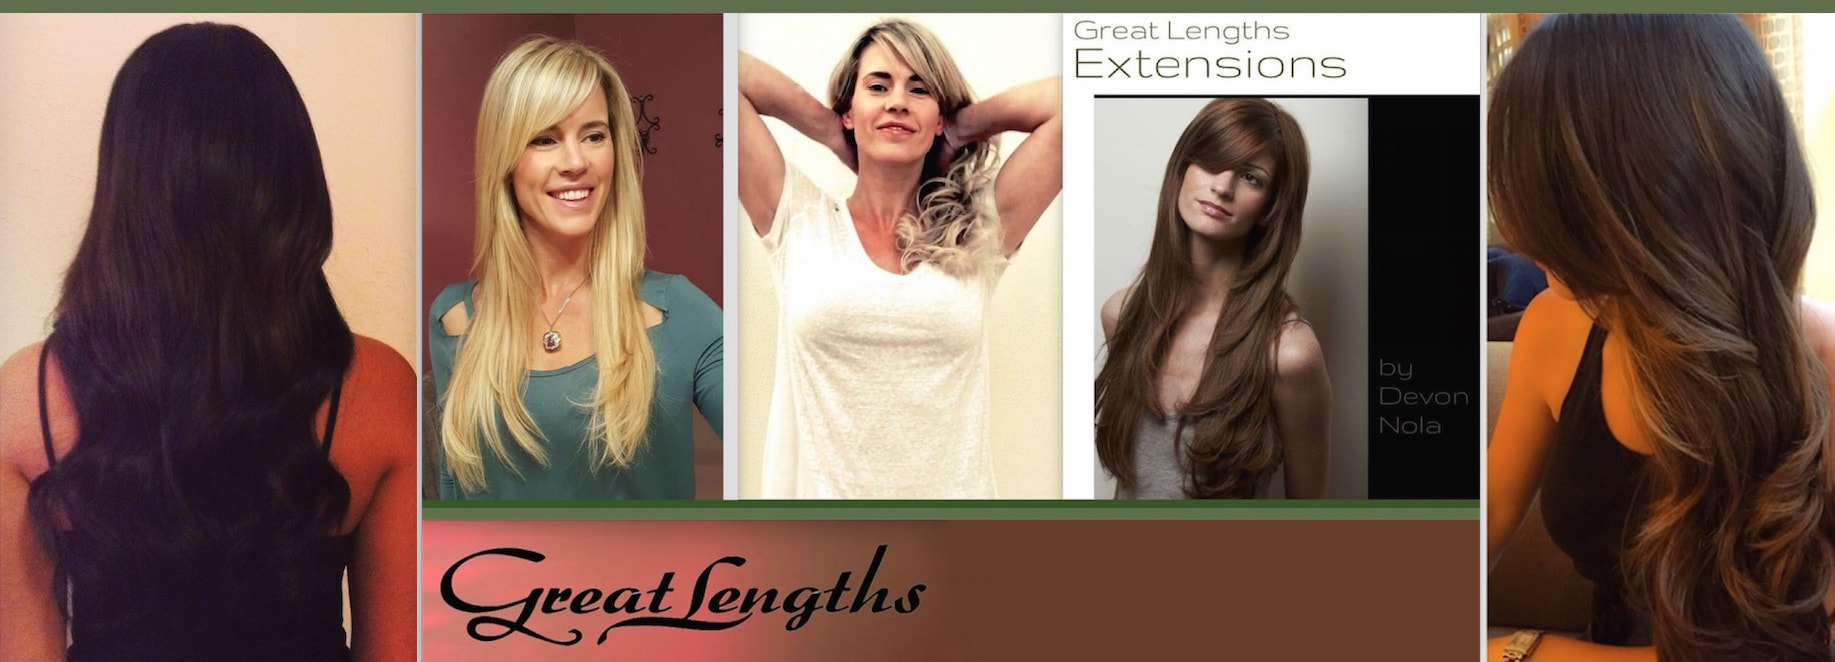 Hair Extensions Manhattan NYC Great Lengths Hair Extensions